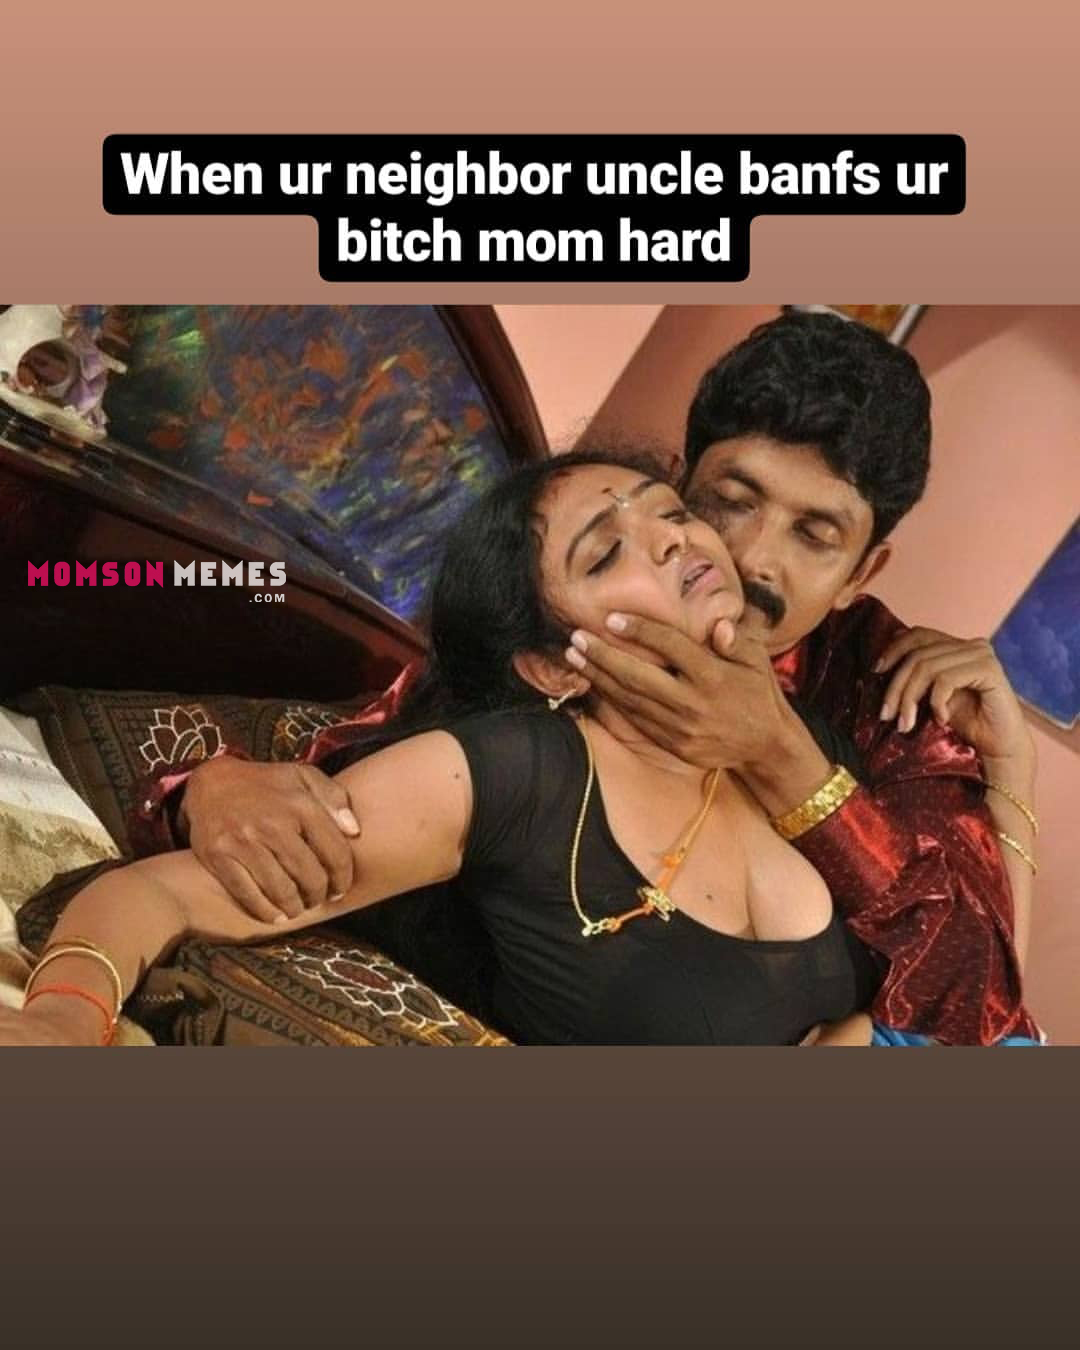 Uncle Captions Porn - When your neighbour uncle bangs your mom! - Incest Mom Son Captions Memes